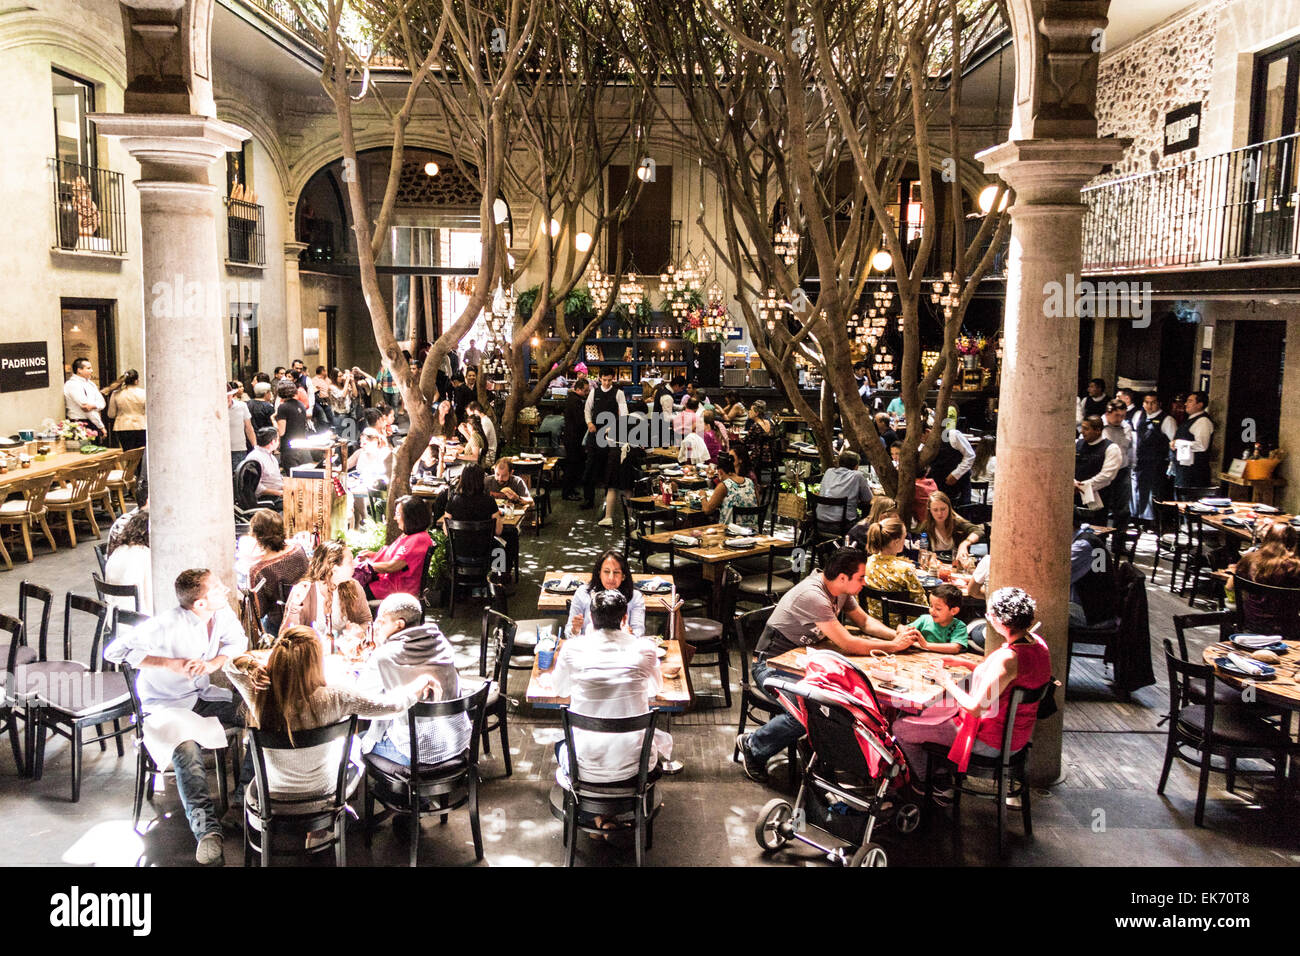 Restaurant in an old Spanish colonial building in Mexico City Downtown Stock Photo